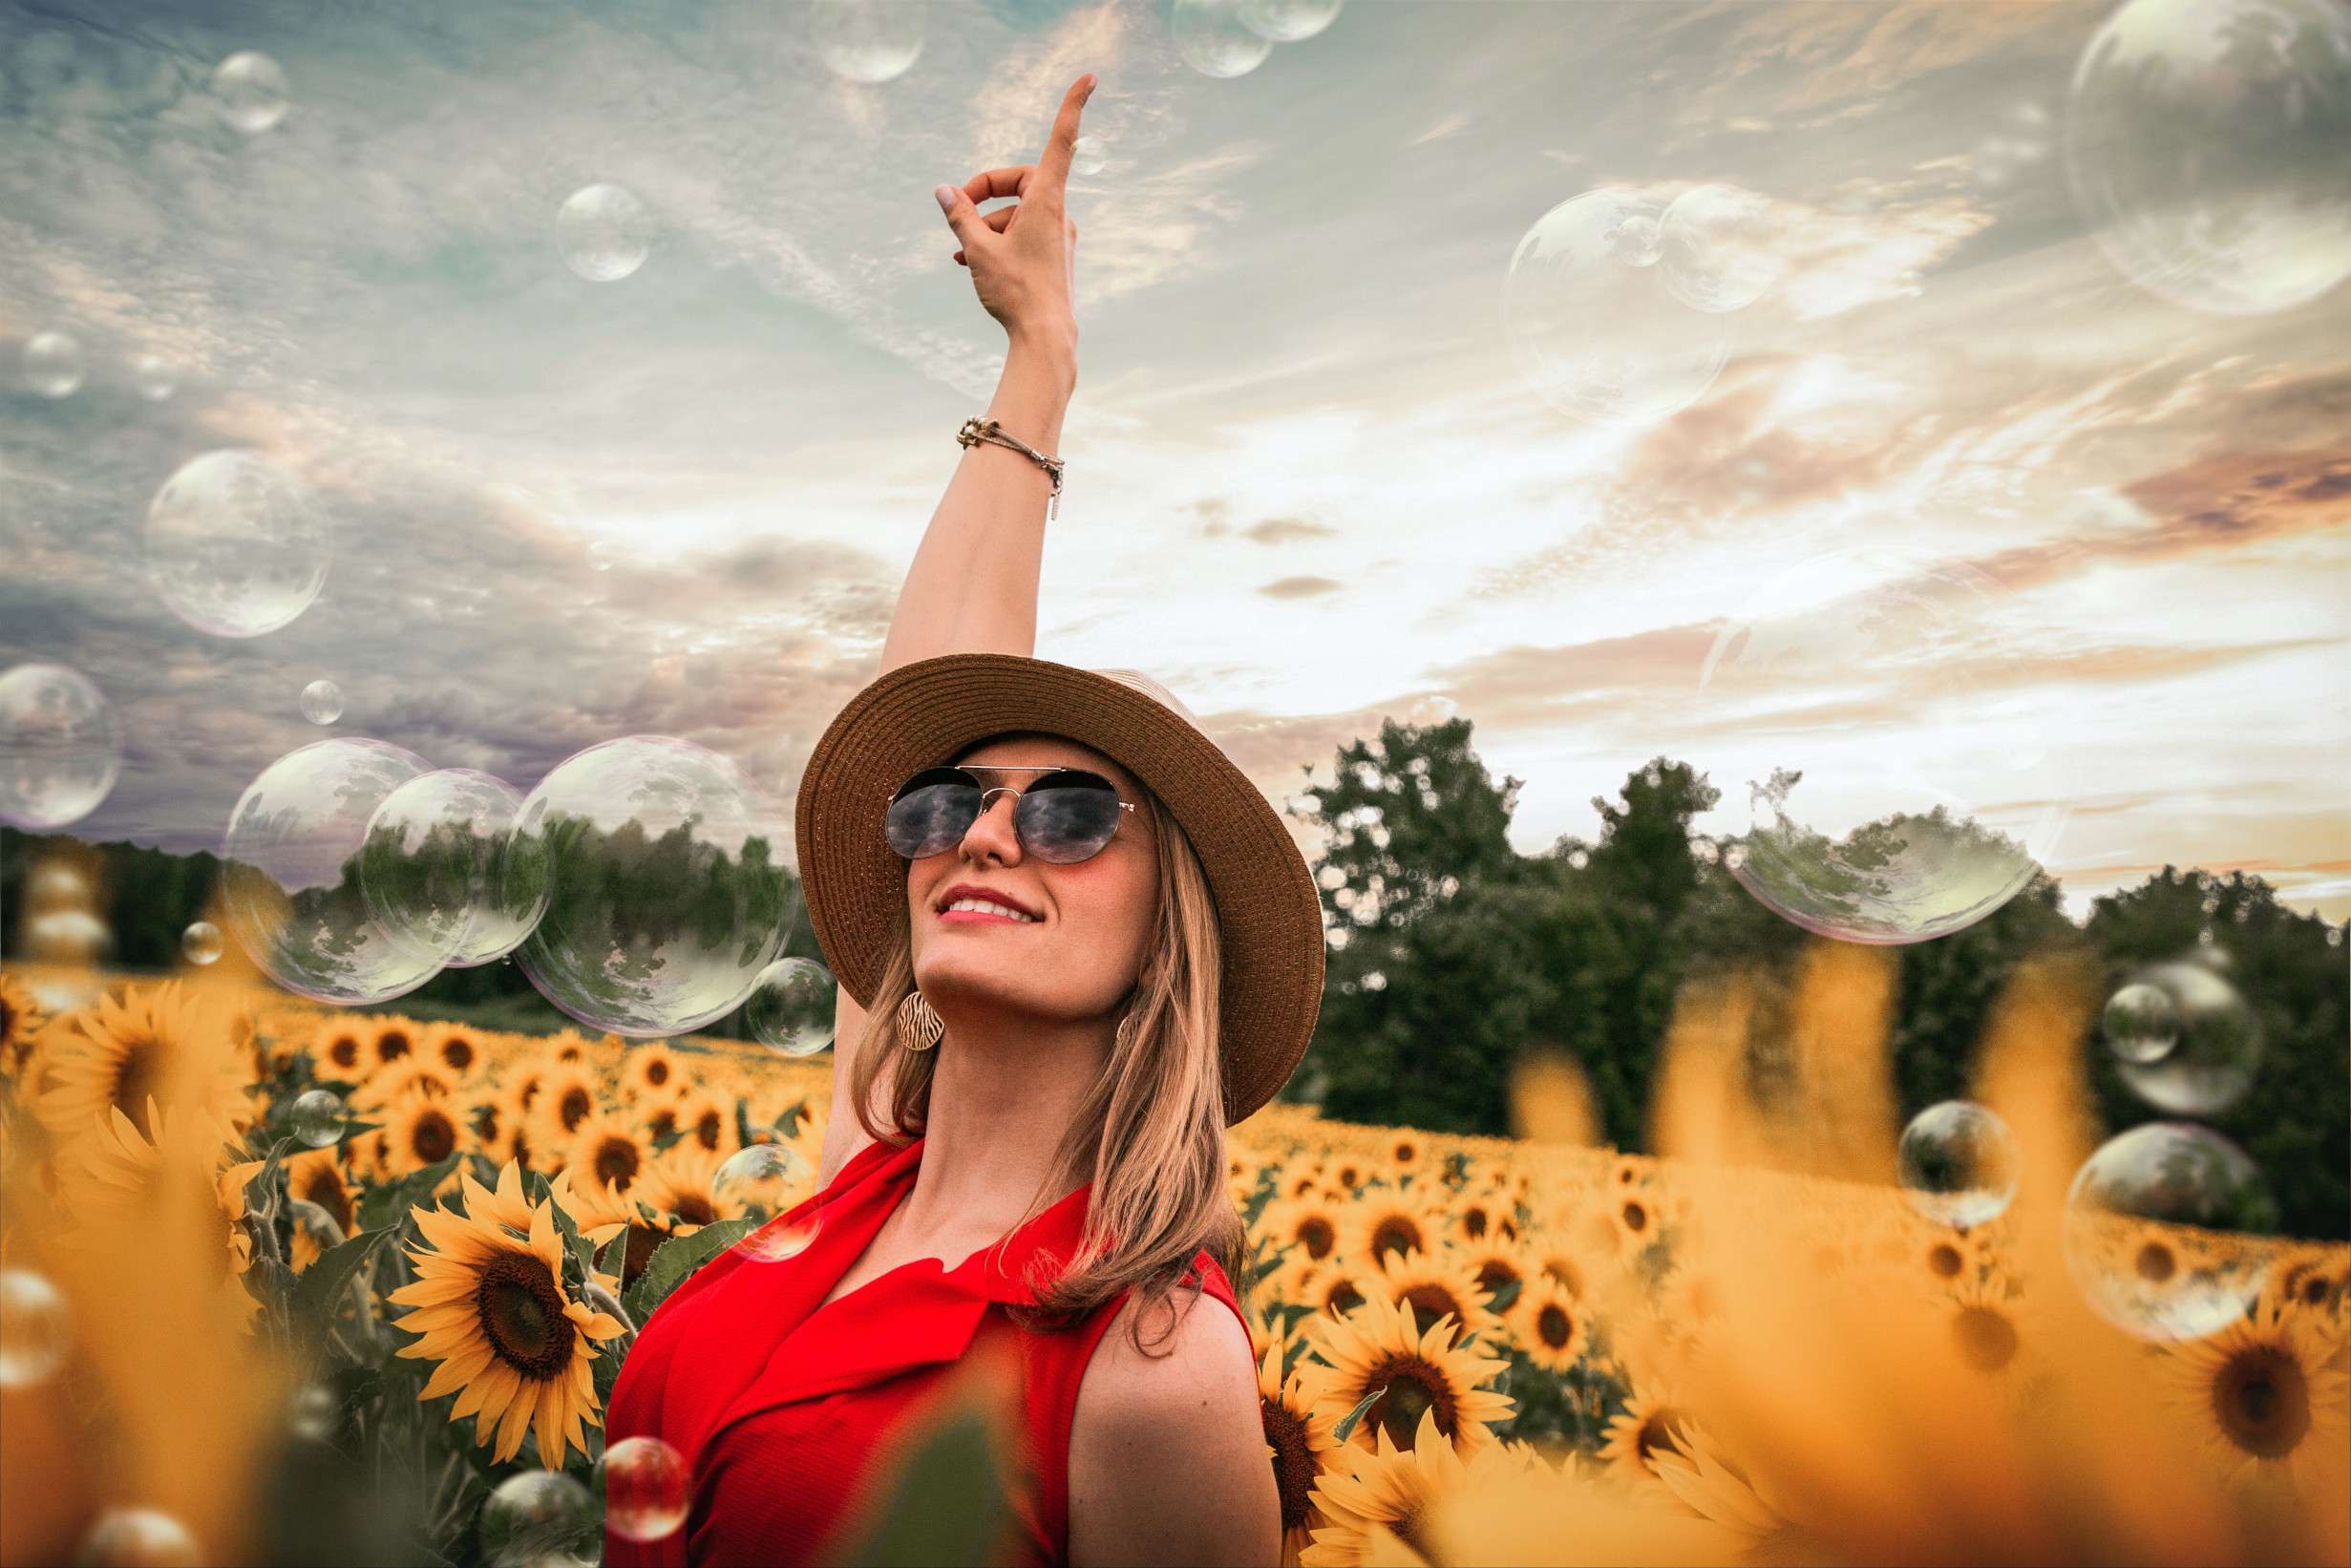 A woman celebrating in a field of sunflowers.